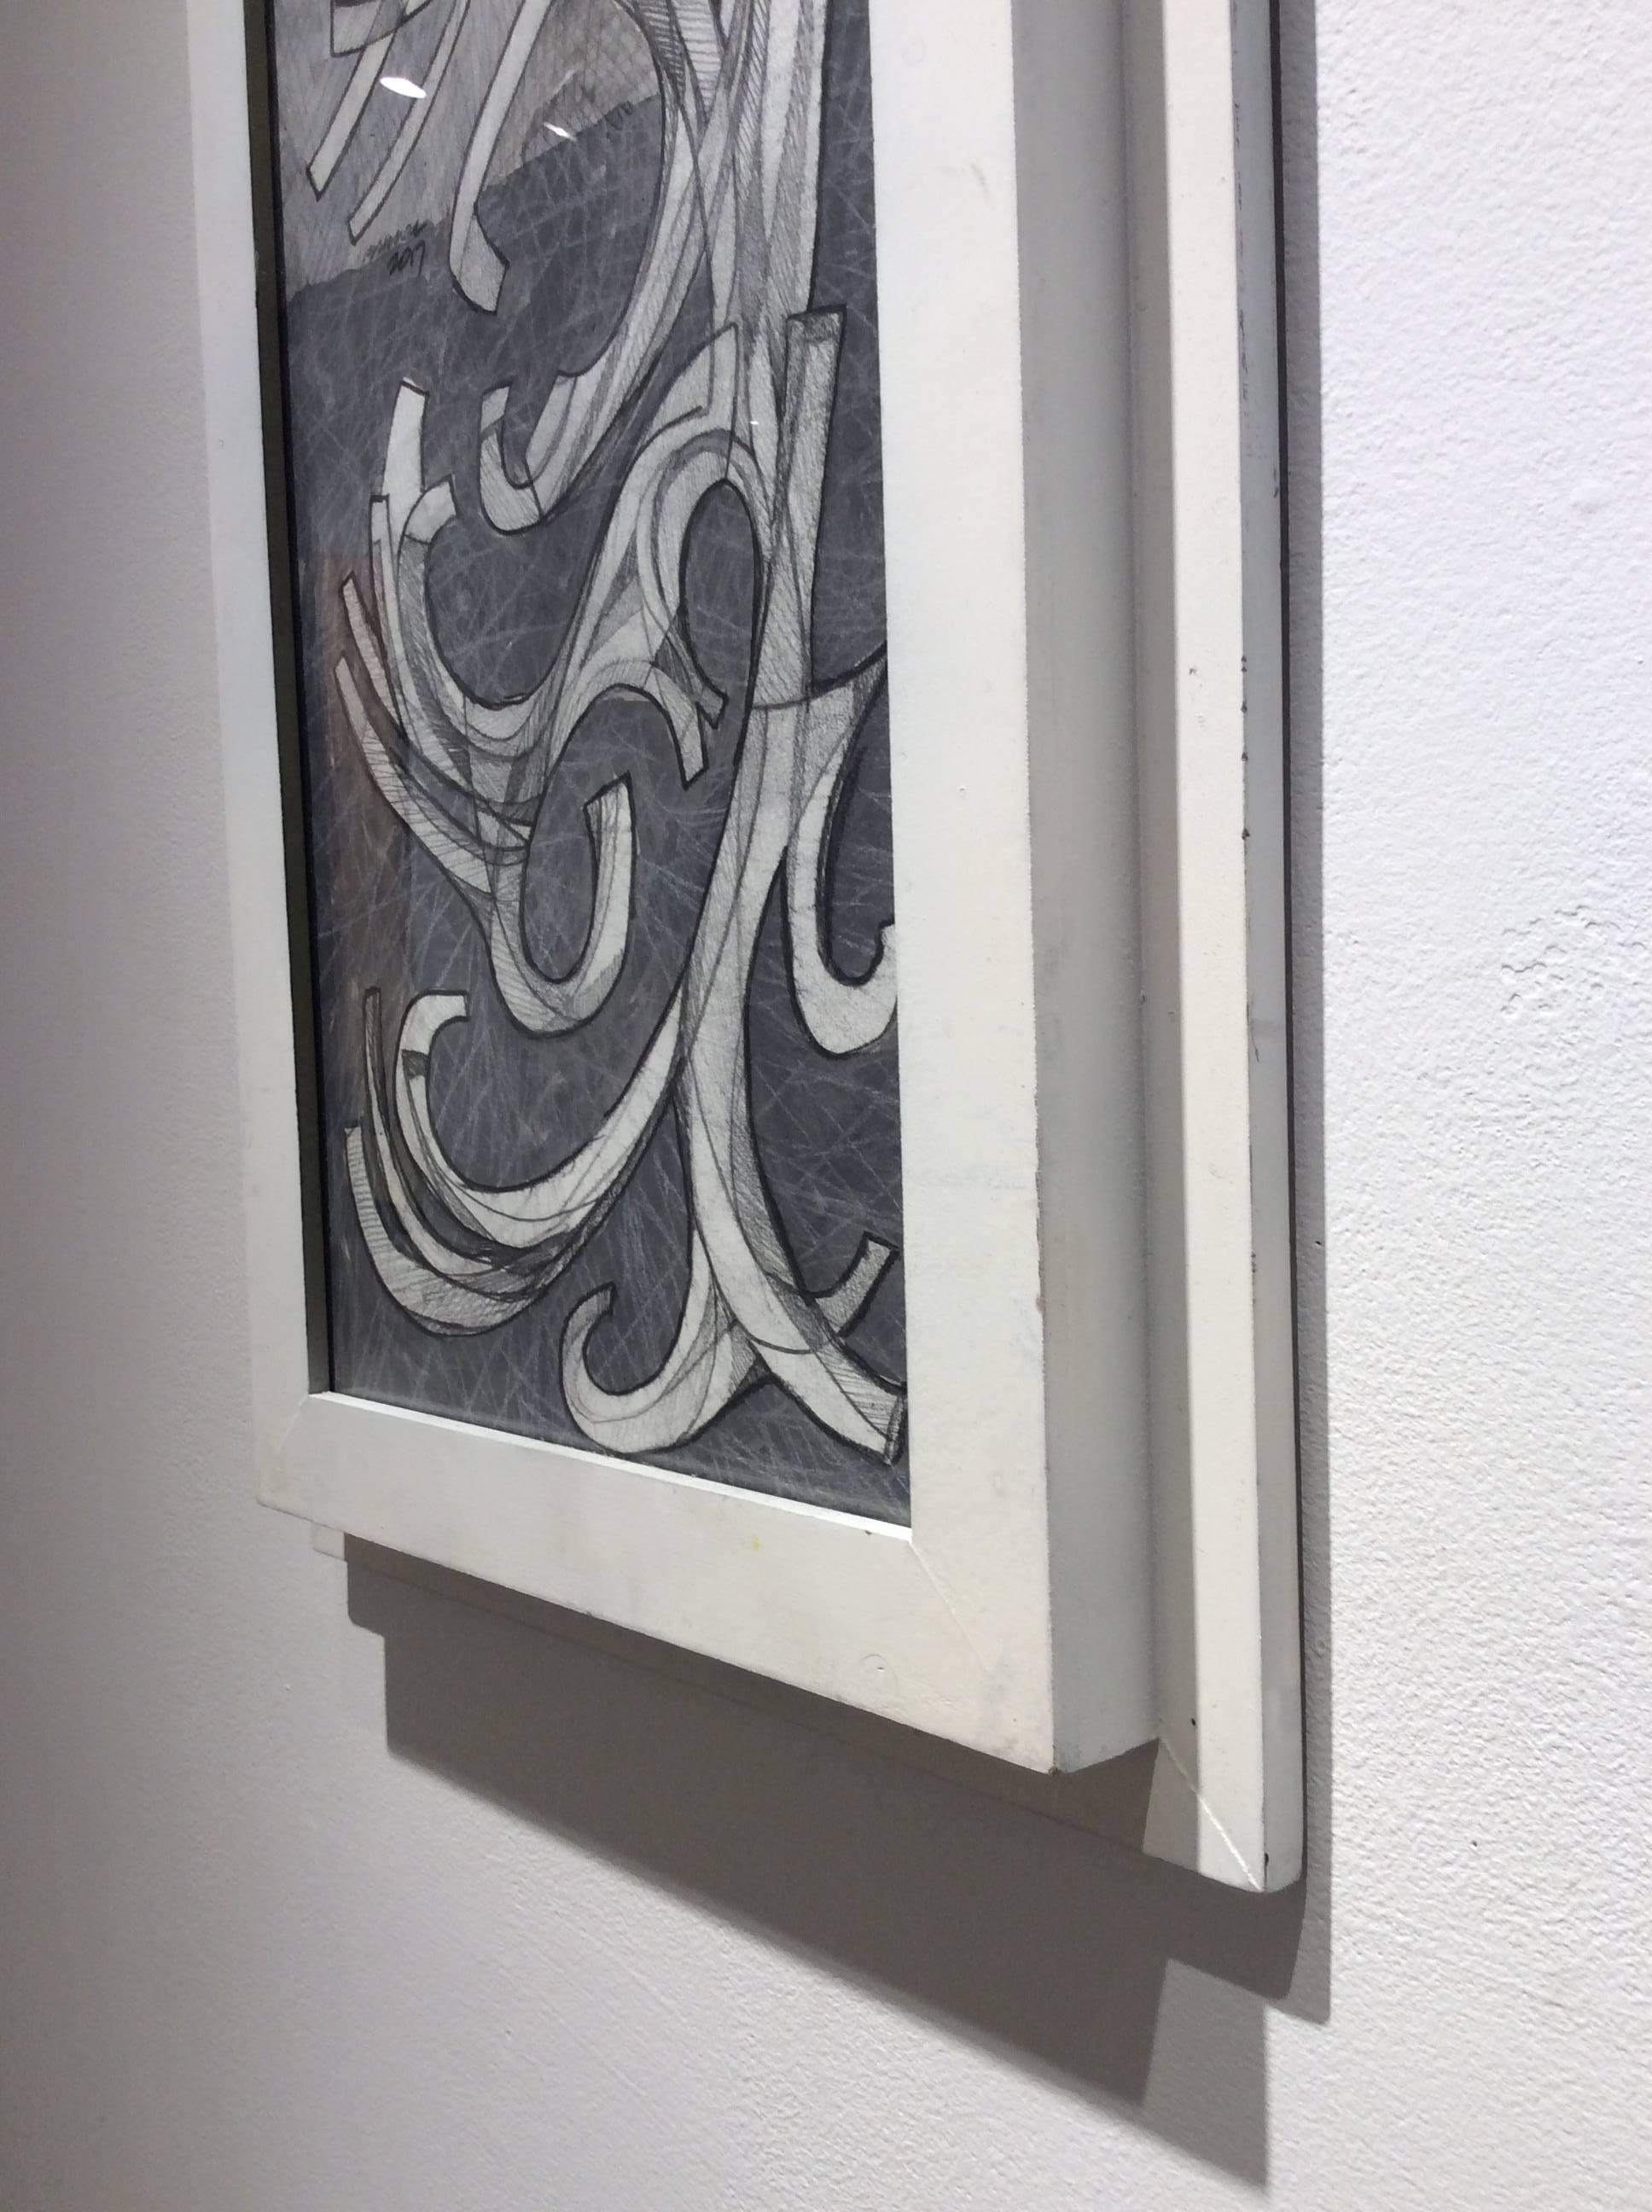 Abstract arabesque drawing on paper in vertical white frame 
Graphite on paper in vintage frame
27 x 11 inches framed
Wire on the back, ready to hang as is

This abstract graphite drawing on paper was inspired by the Arabesque, a decorative style of